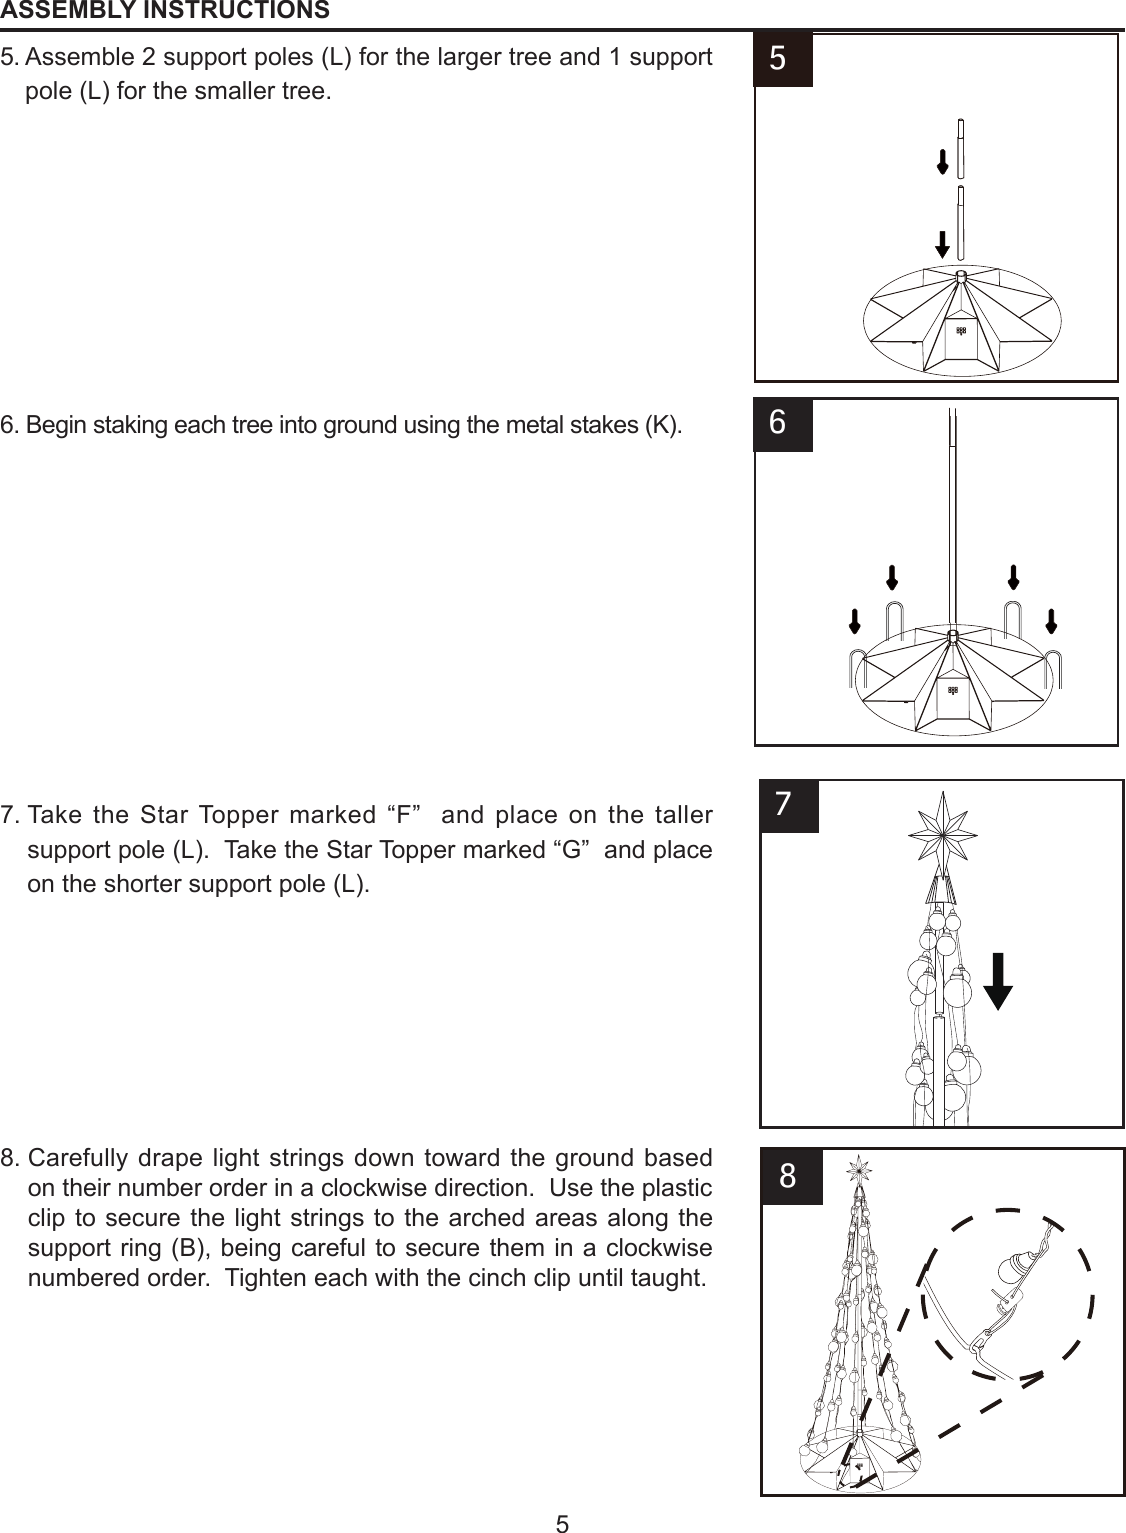 55.  Assemble 2 support poles (L) for the larger tree and 1 support pole (L) for the smaller tree.6.  Begin staking each tree into ground using the metal stakes (K).7.  Take the Star Topper marked “F”  and place on the taller support pole (L).  Take the Star Topper marked “G”  and place on the shorter support pole (L).8.  Carefully drape light strings down toward the ground based on their number order in a clockwise direction.  Use the plastic clip to secure the light strings to the arched areas along the support ring (B), being careful to secure them in a clockwise numbered order.  Tighten each with the cinch clip until taught.6F78ASSEMBLY INSTRUCTIONS5